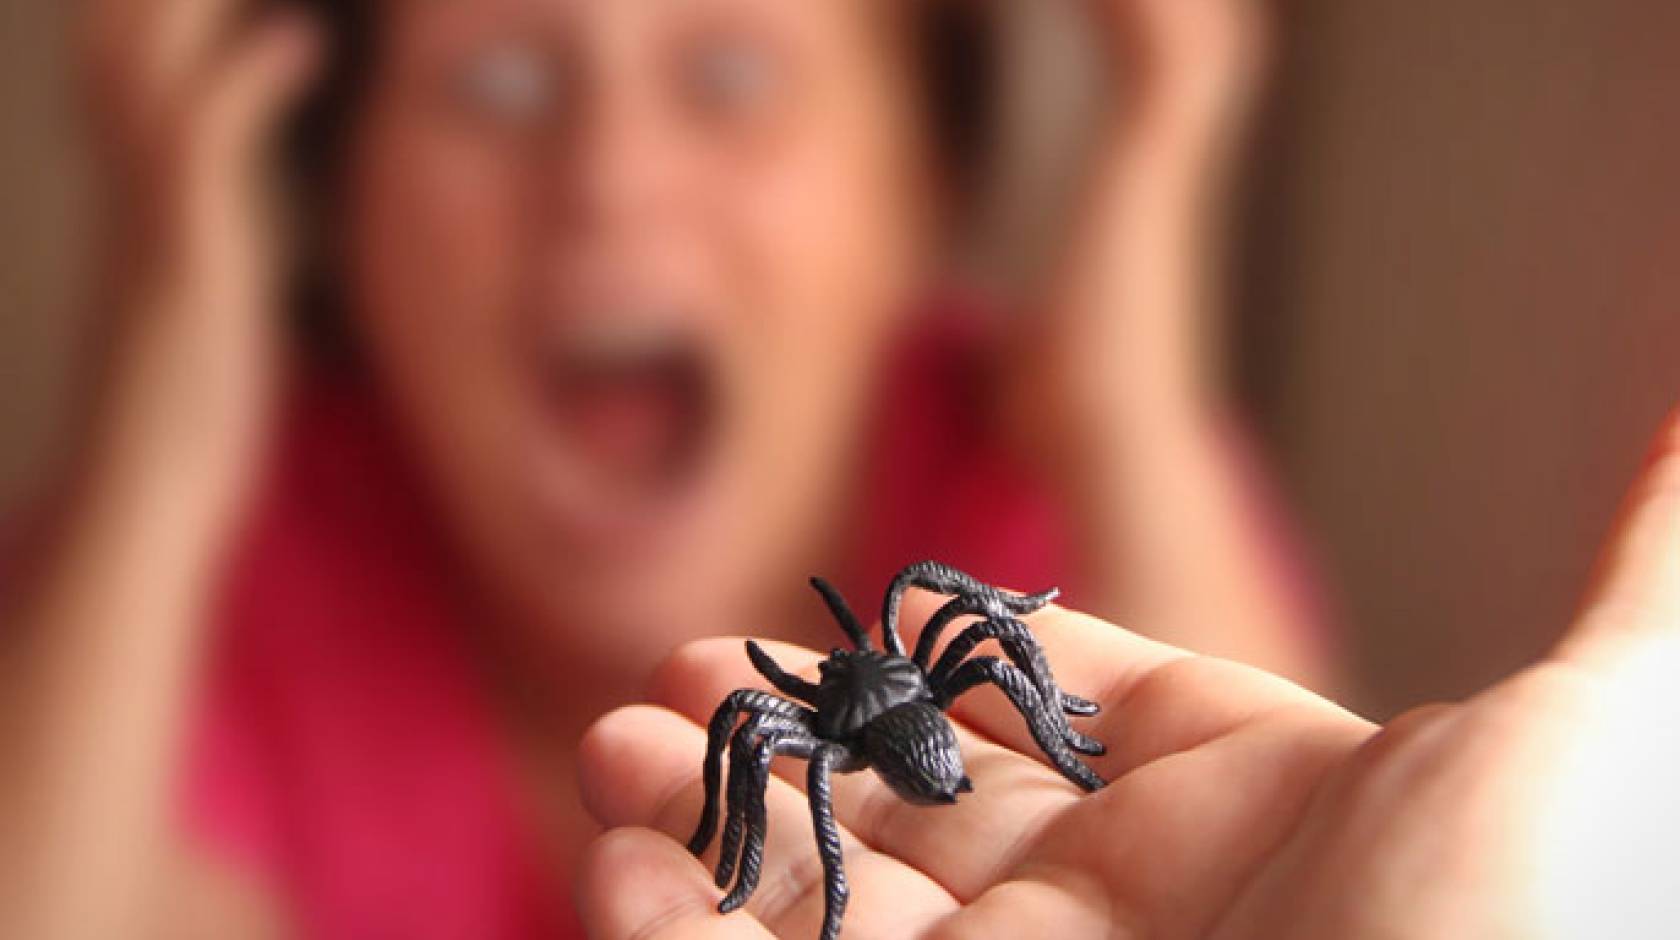 Spider in a hand and a scared woman in the background